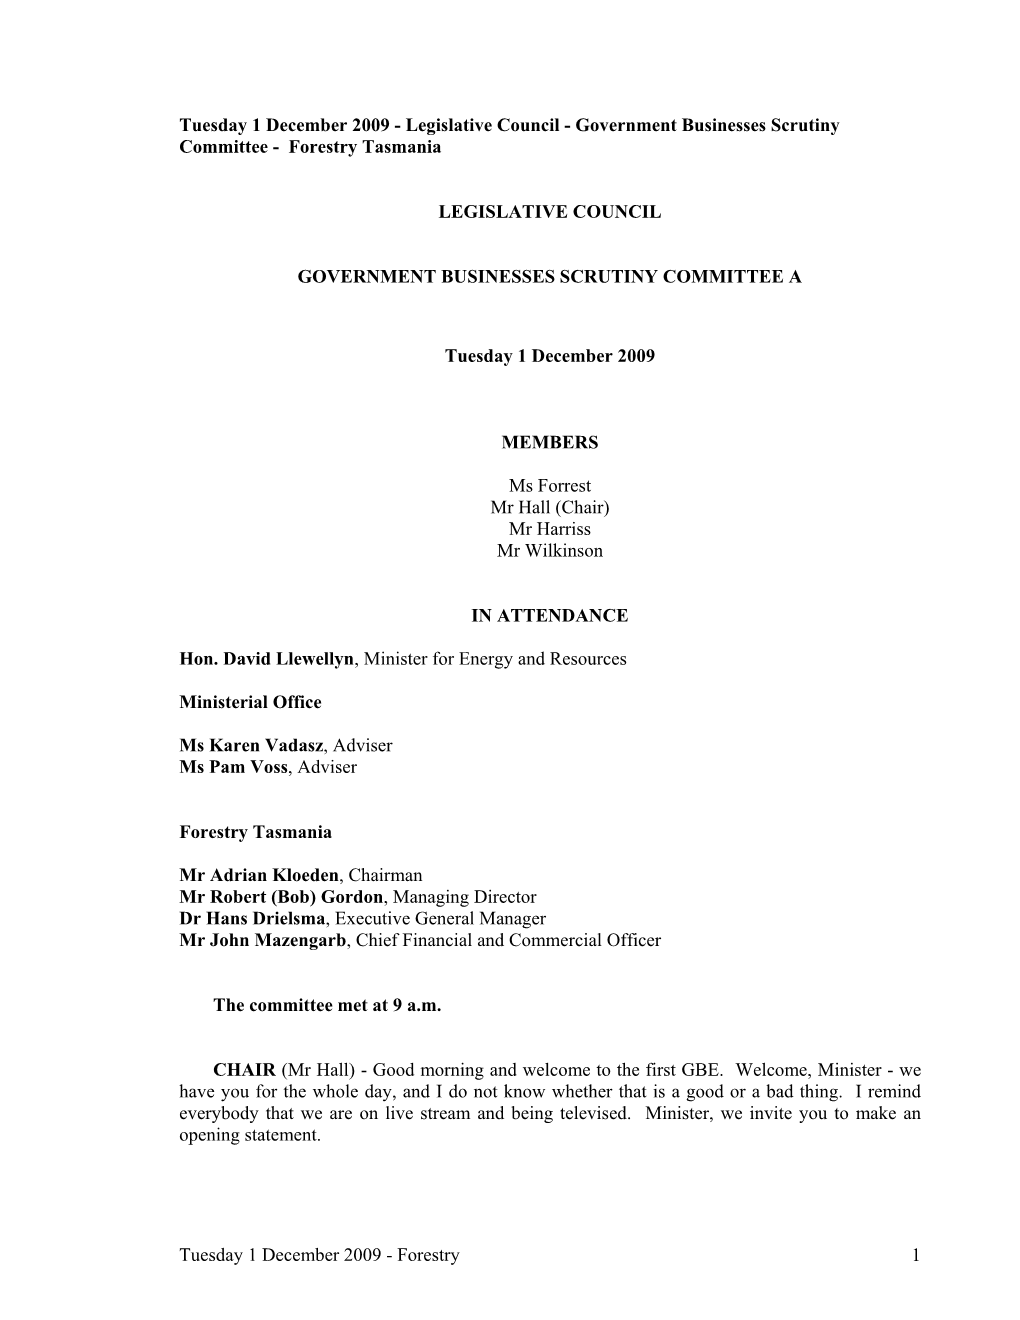 1 December 2009 - Legislative Council - Government Businesses Scrutiny Committee - Forestry Tasmania